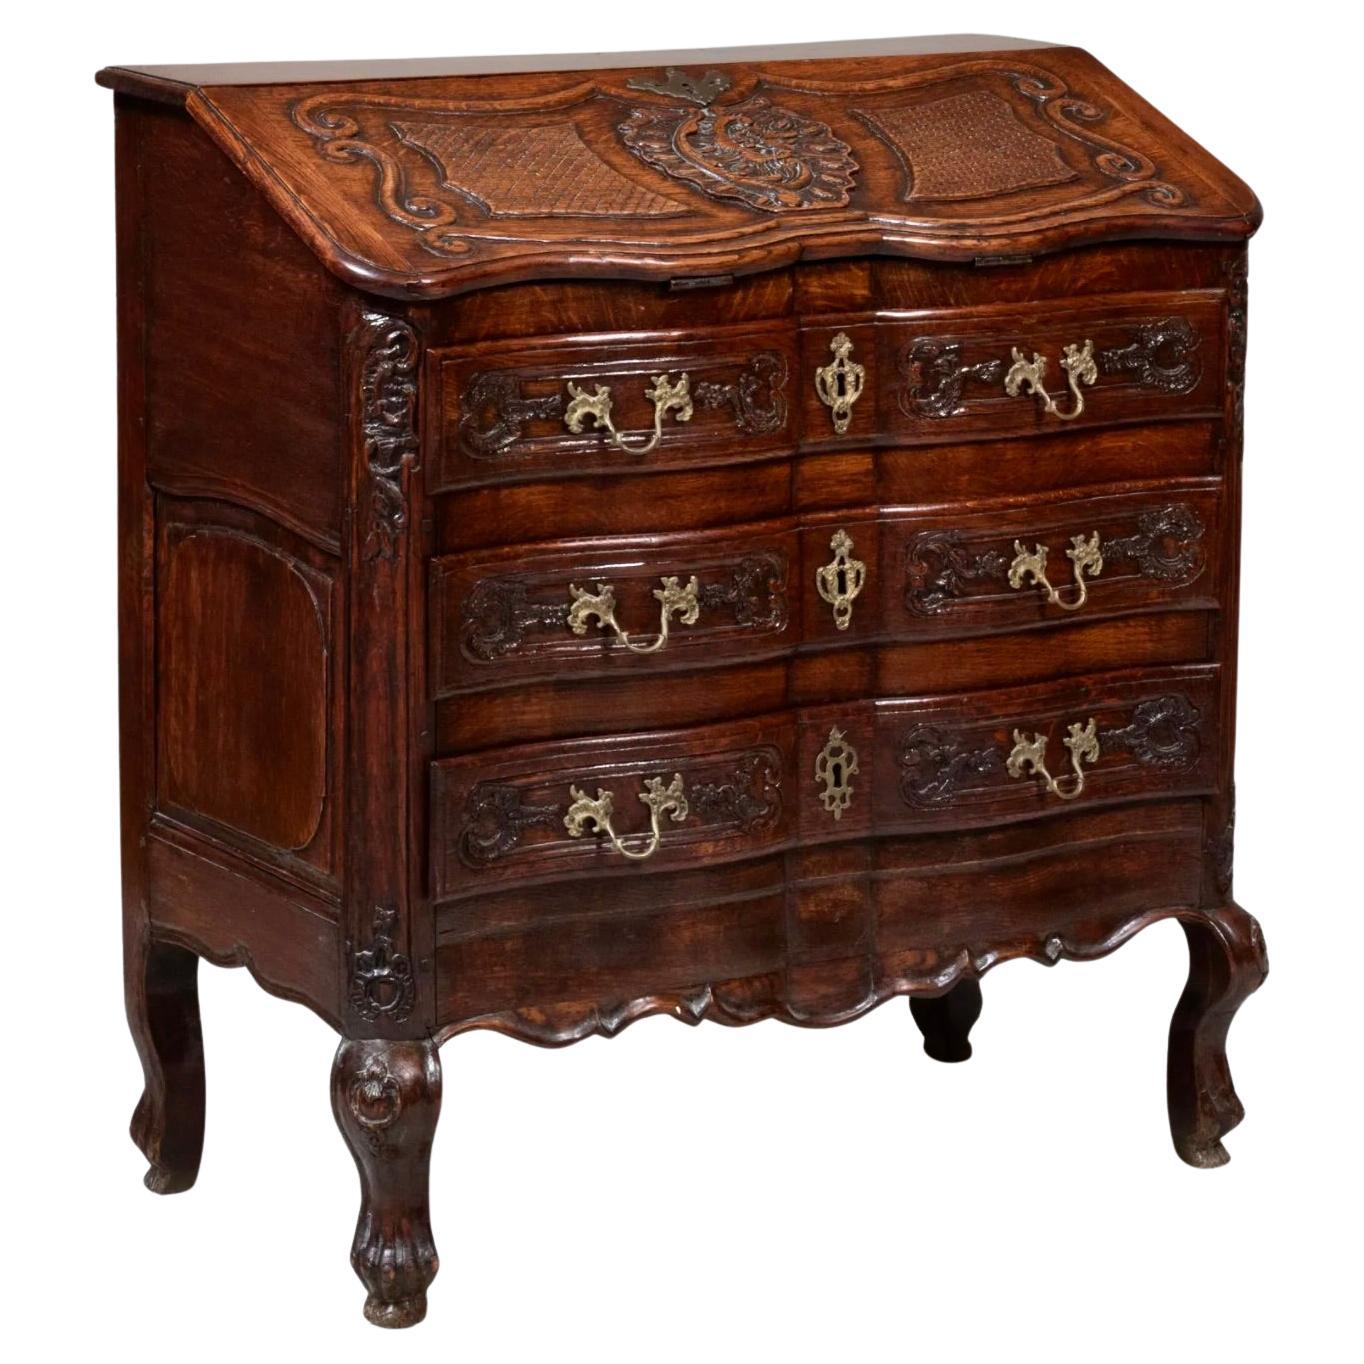 Continental Régence Inspired Commode With Rococo Carved Desk Top For Sale